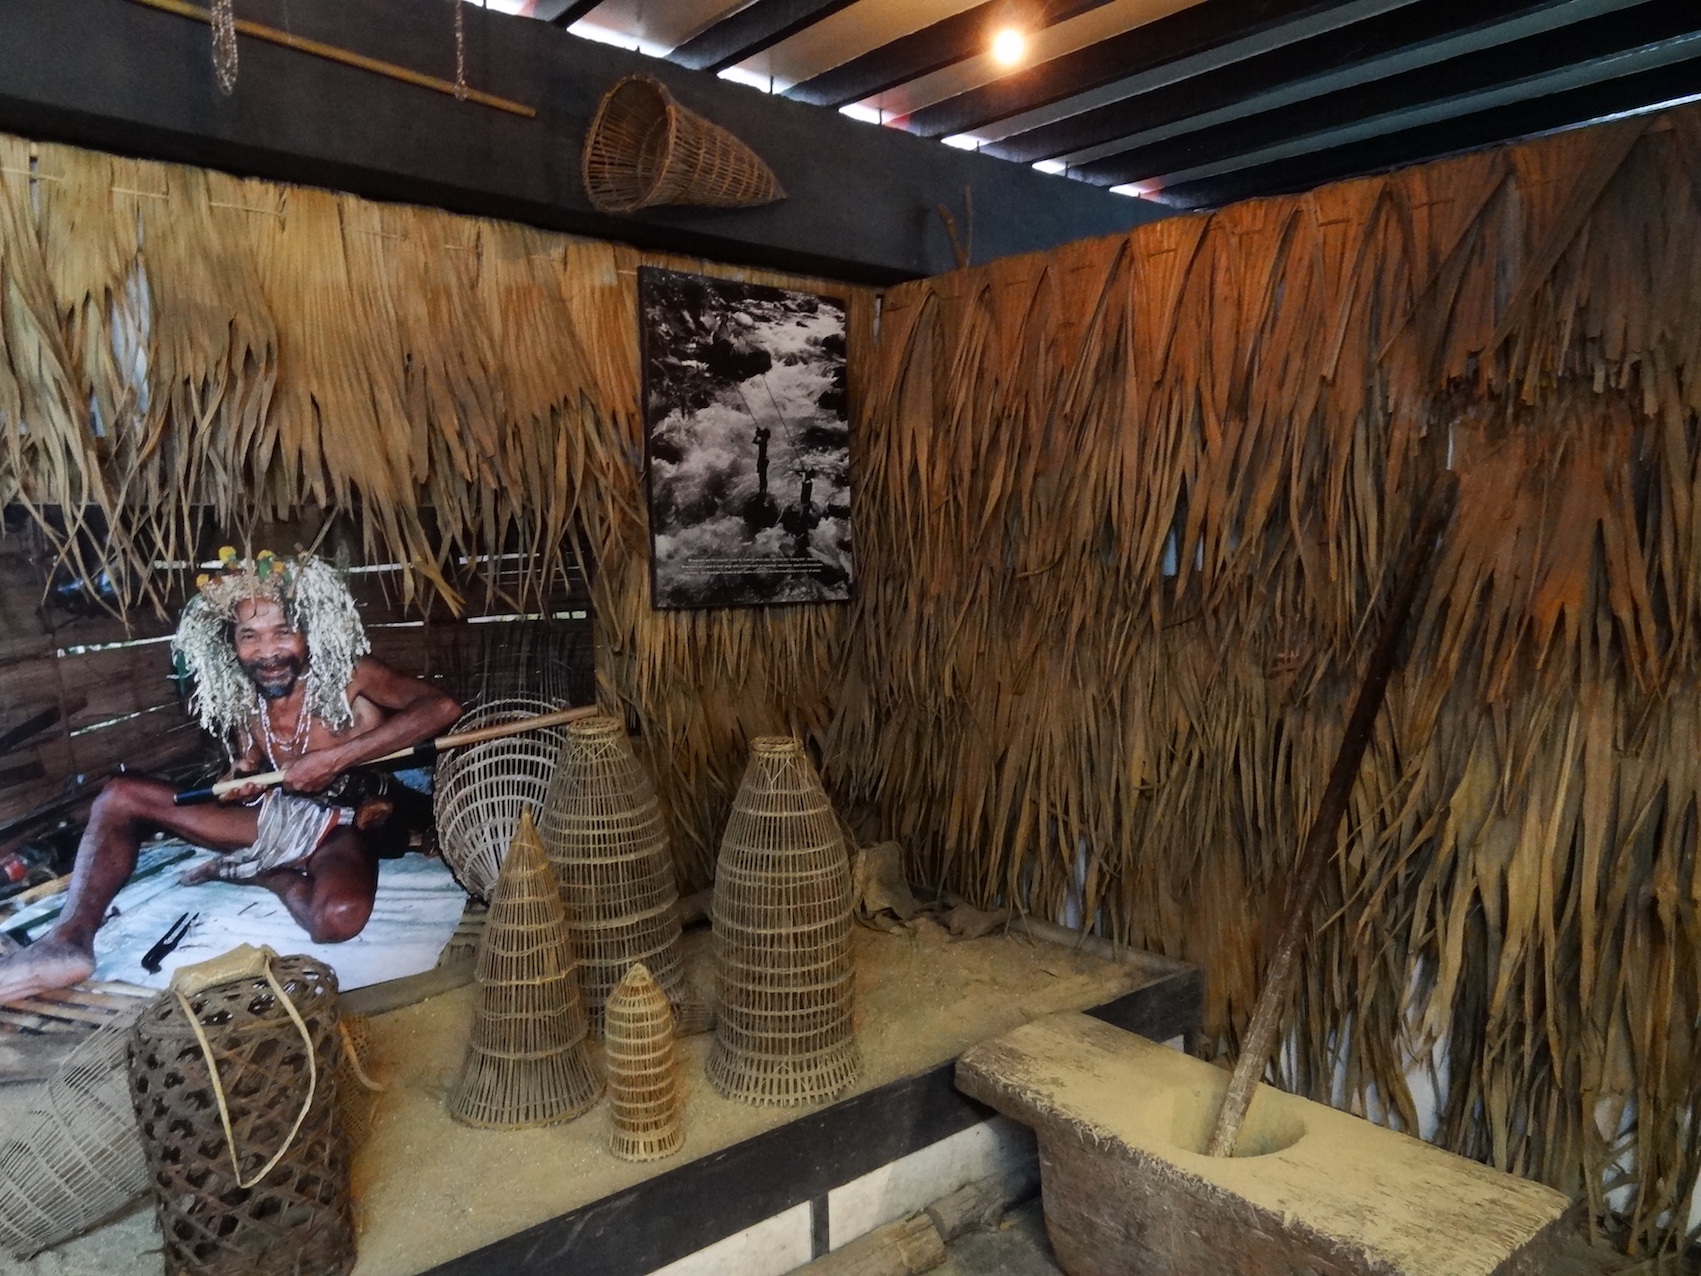 Discover how it was in Cameron Highlands. Time Tunnel's exhibits include aspects of the indigenous people who still exist in the jungle - the Orang Asli.